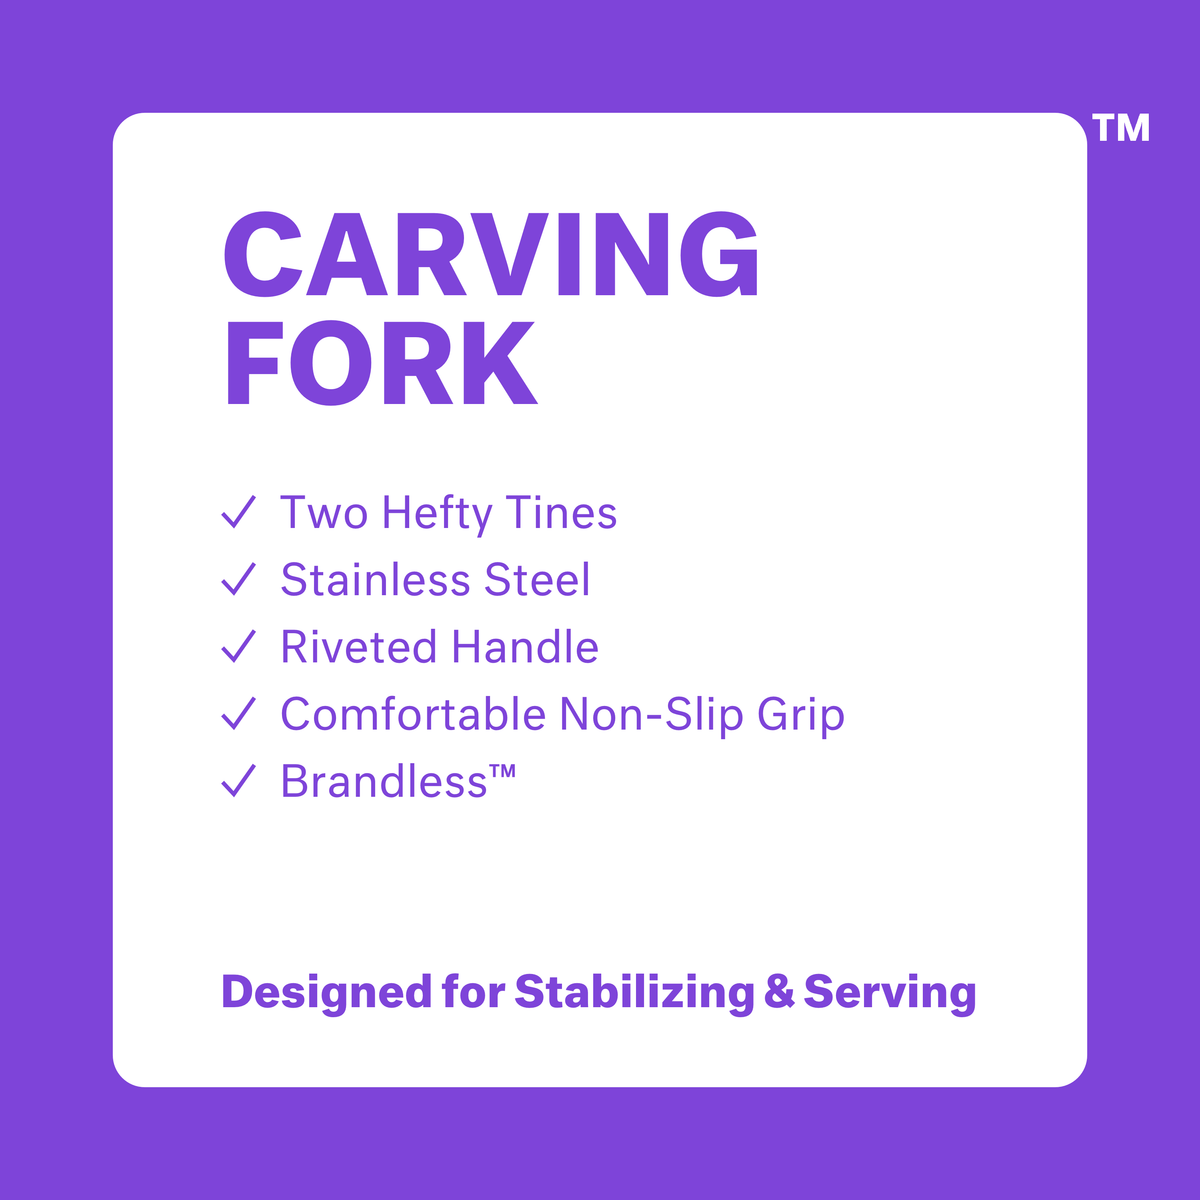 Carving Fork. Two hefty tines. Stainless steel. Riveted handle. Comfortable non-slip grip. Brandless. Designed for stabilizing &amp; serving.